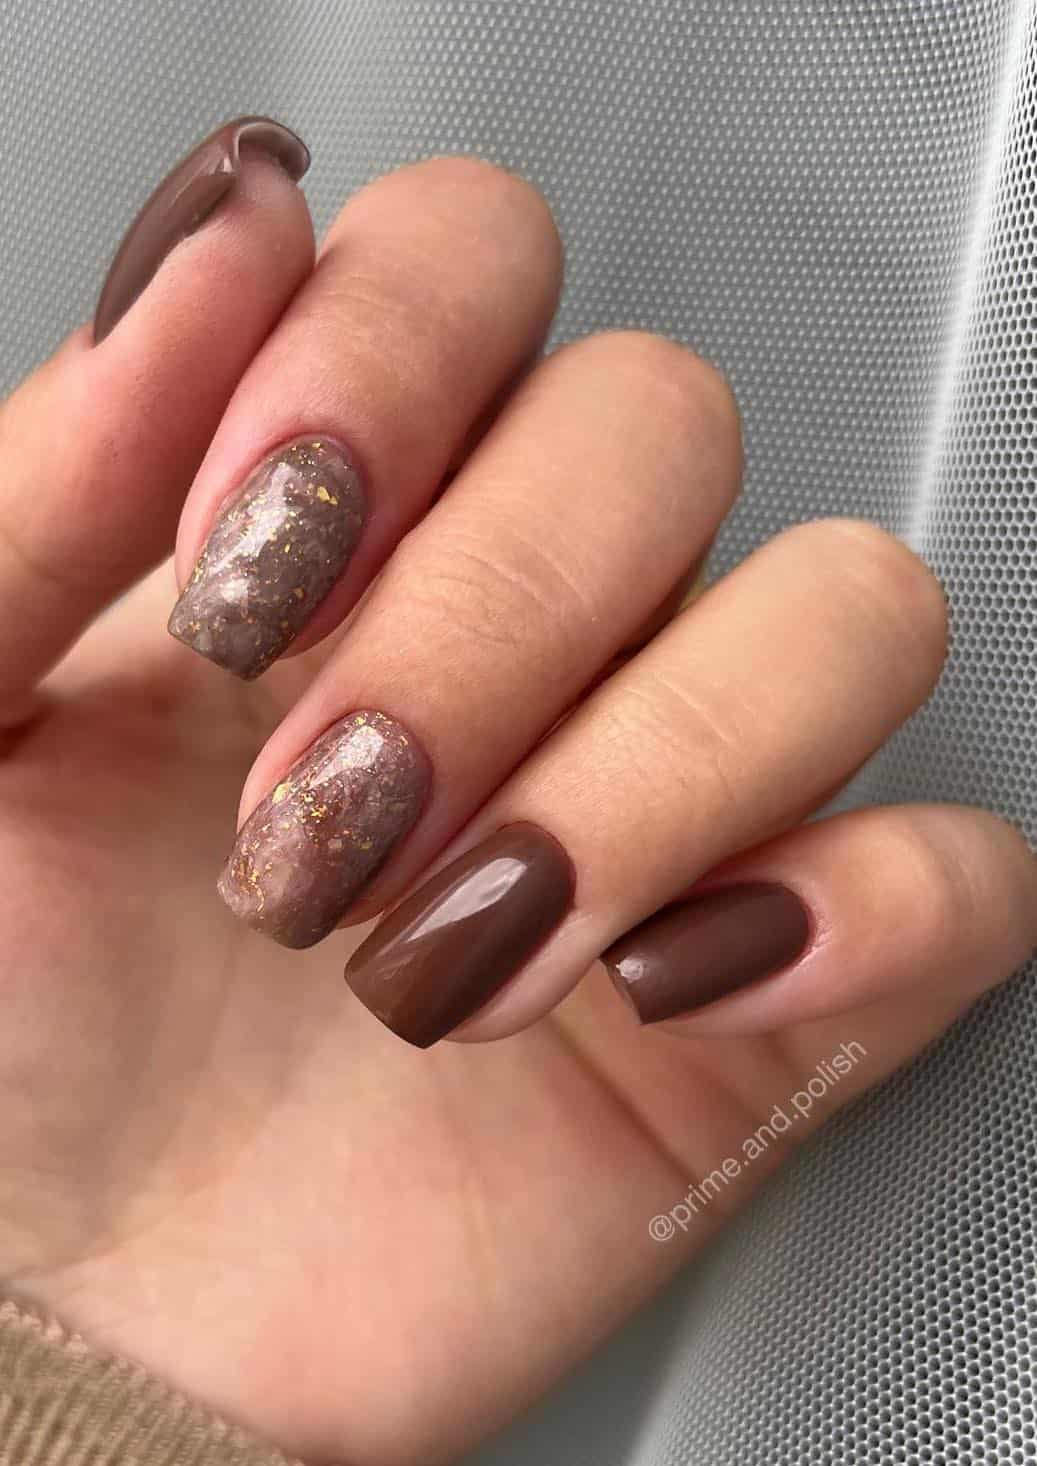 A hand with short square nails painted a glossy brown color with two marbled brown and white accent nails